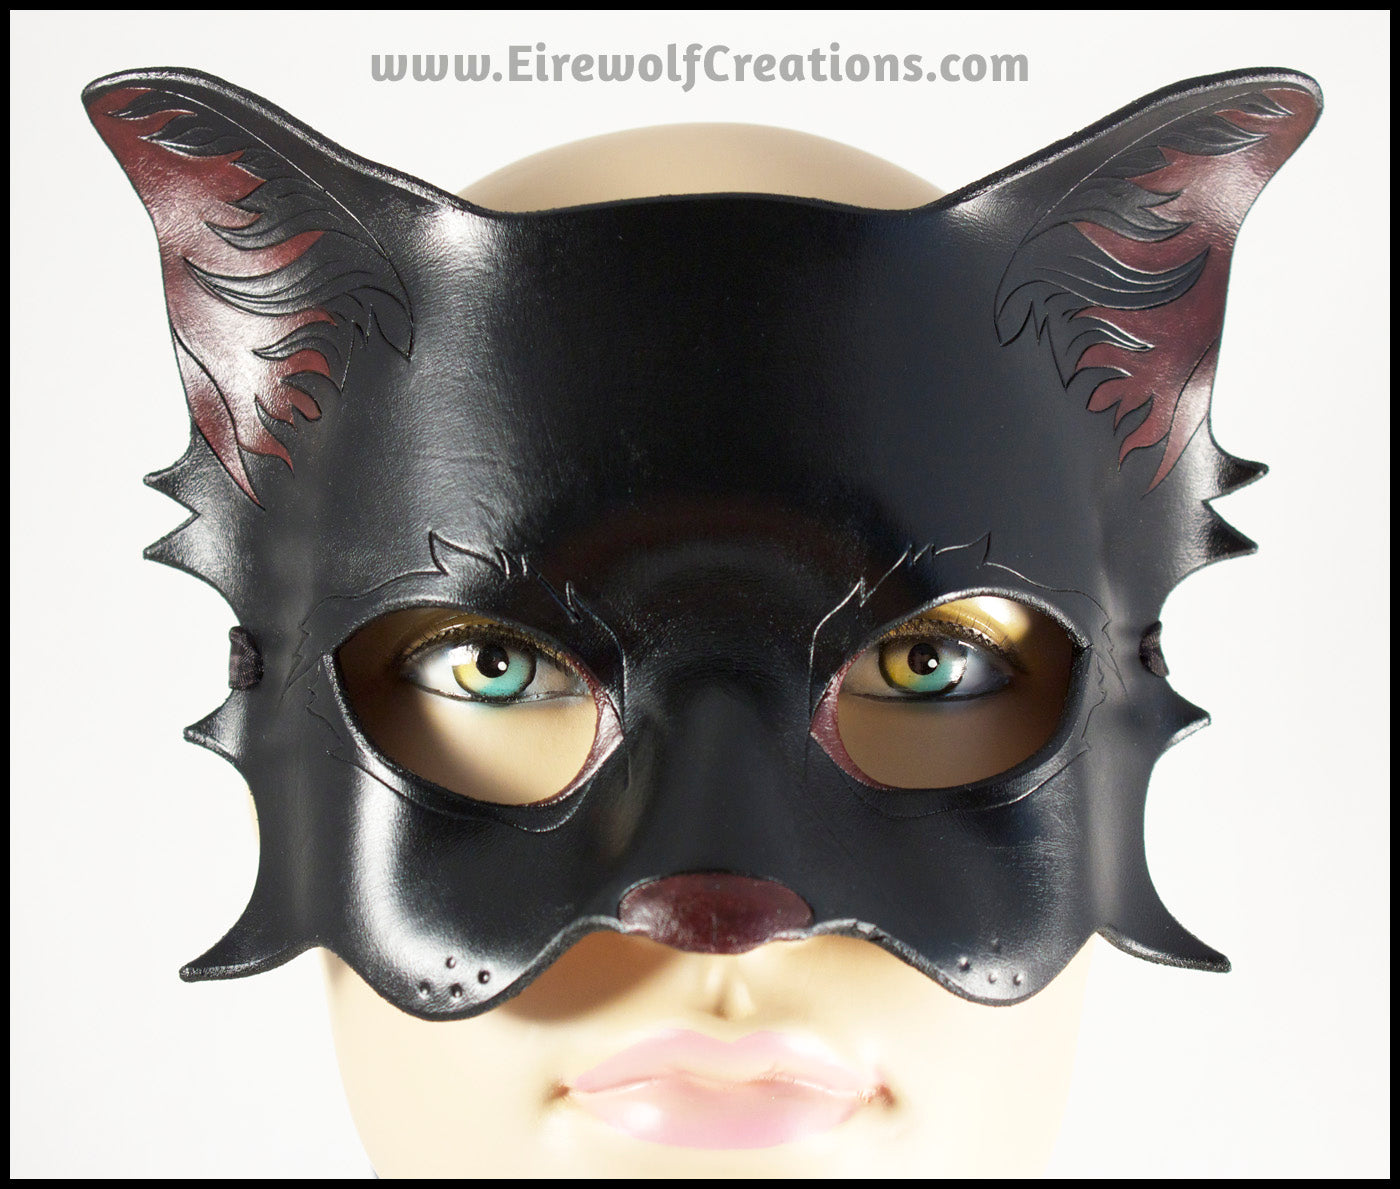 Lioness mask, handmade leather lion wild cat mask for Halloween